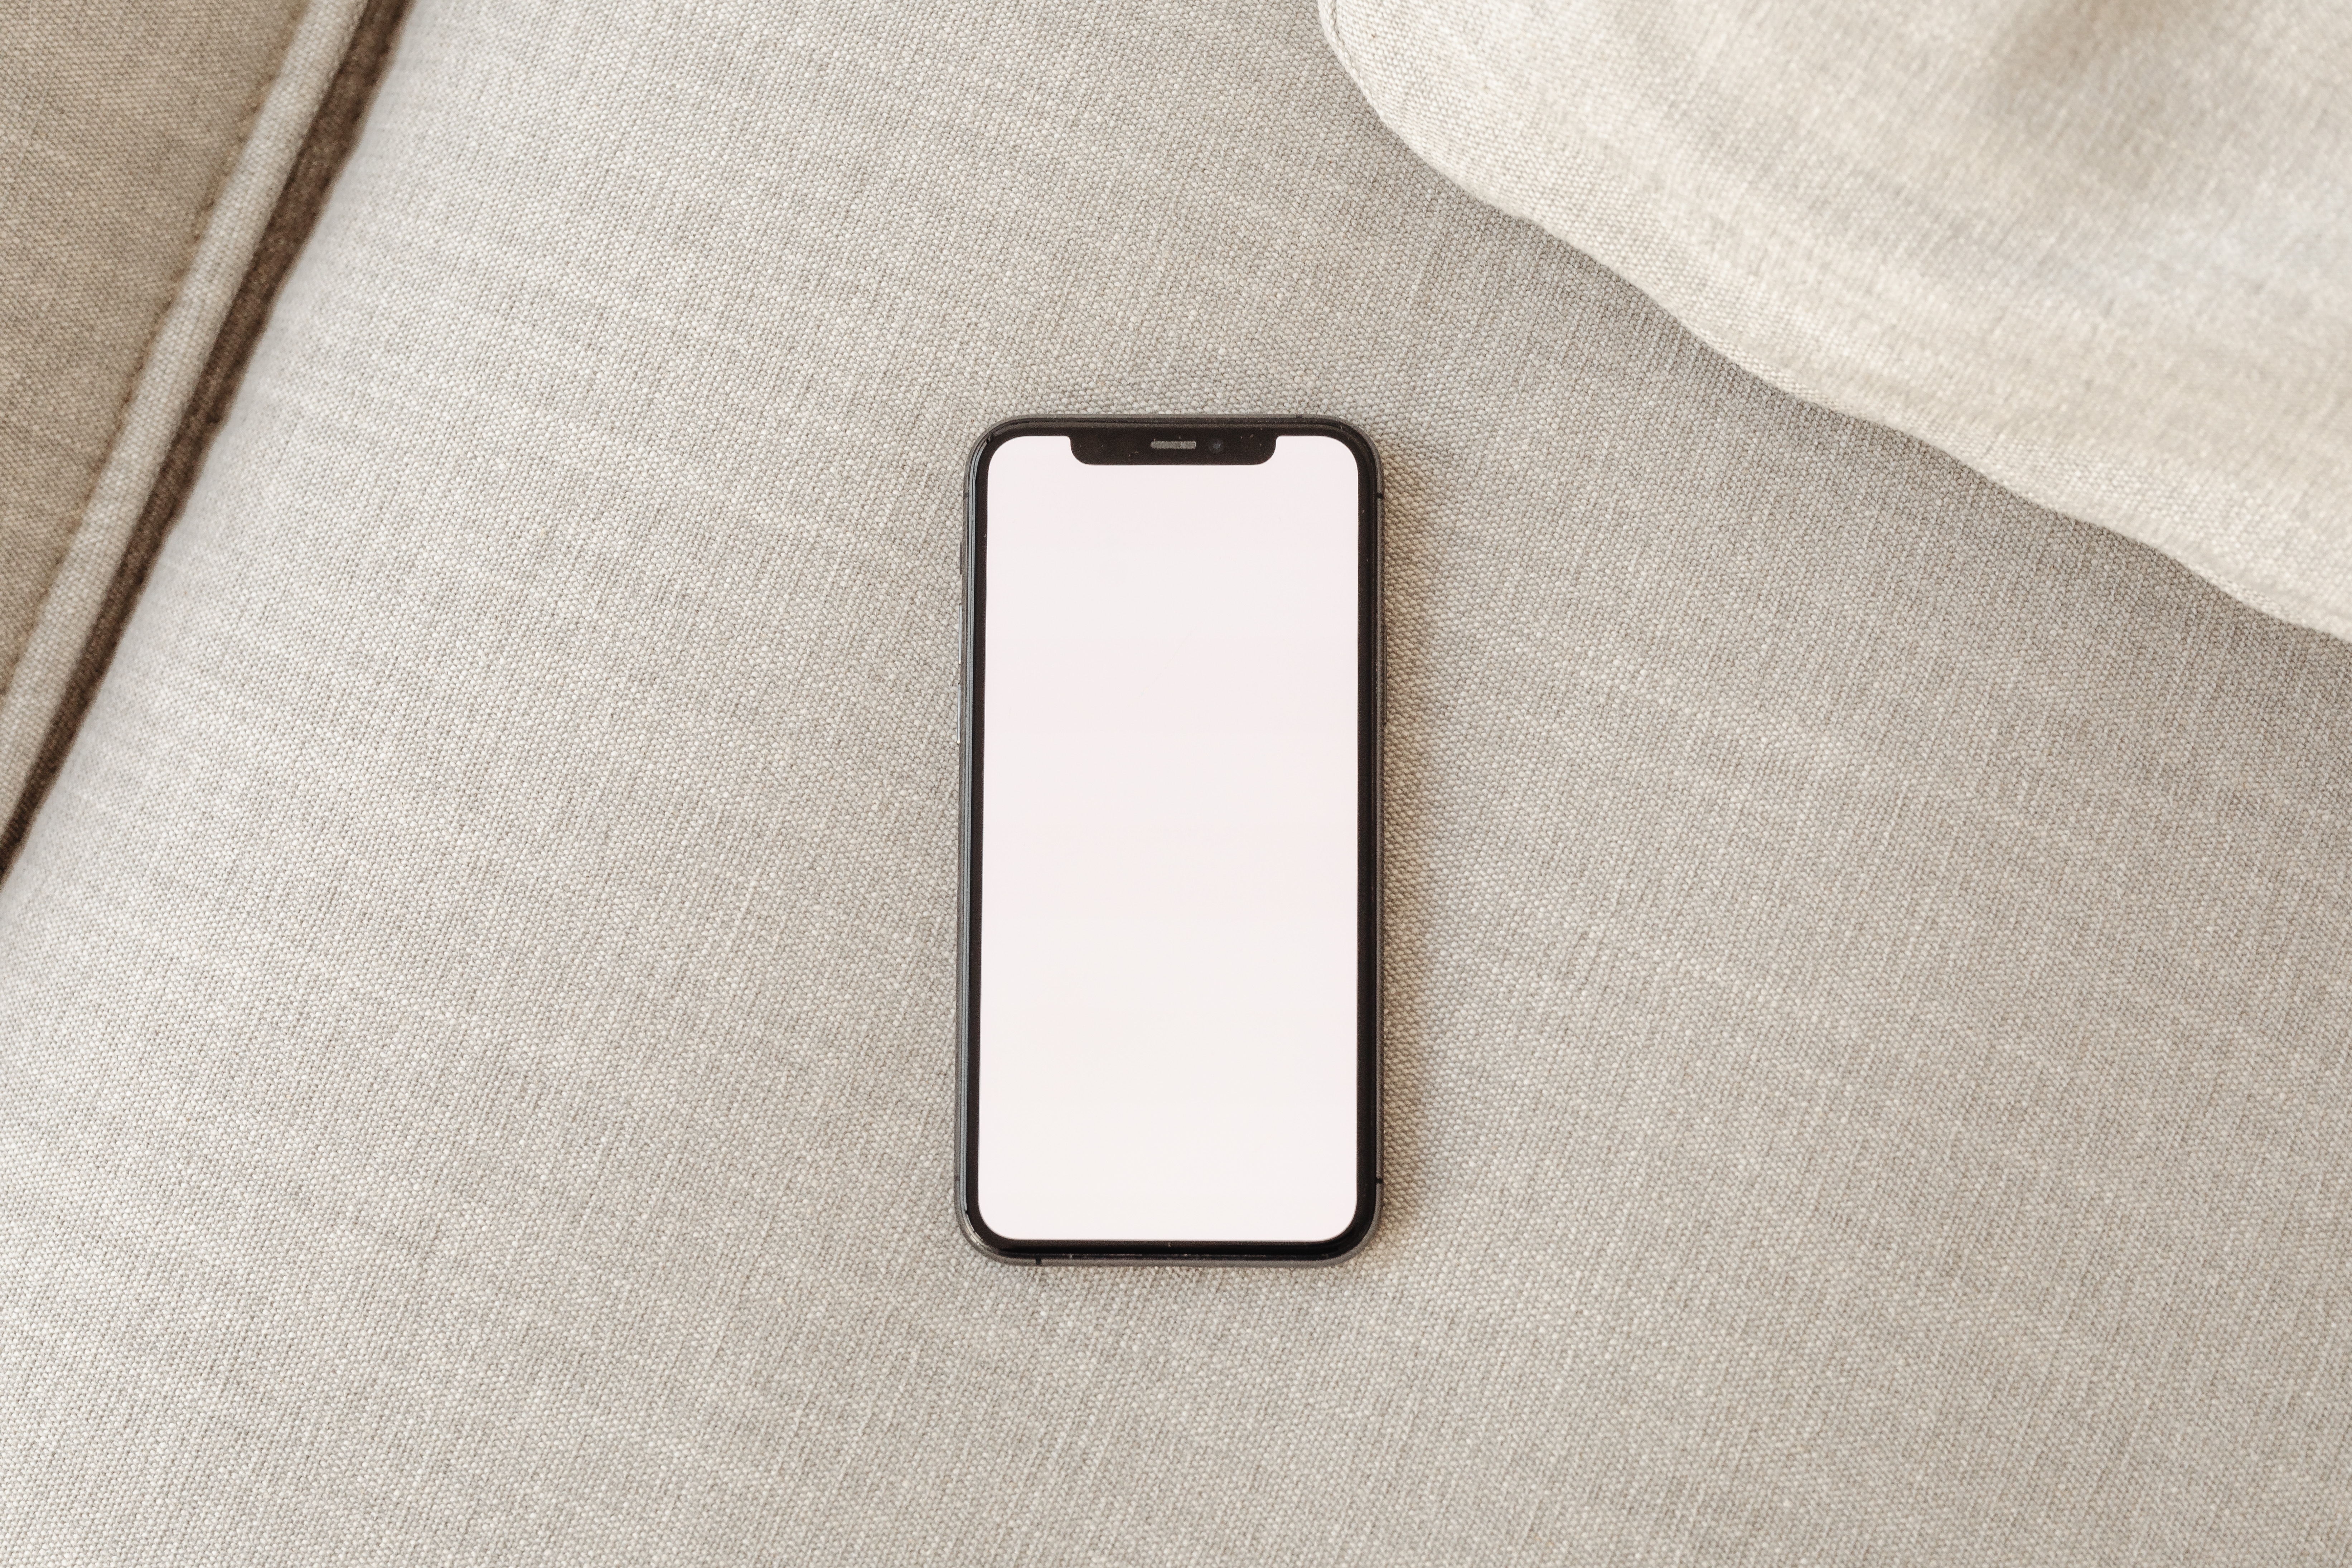 Mockup photo - cell phone - iPhone 11 Pro - blank screen